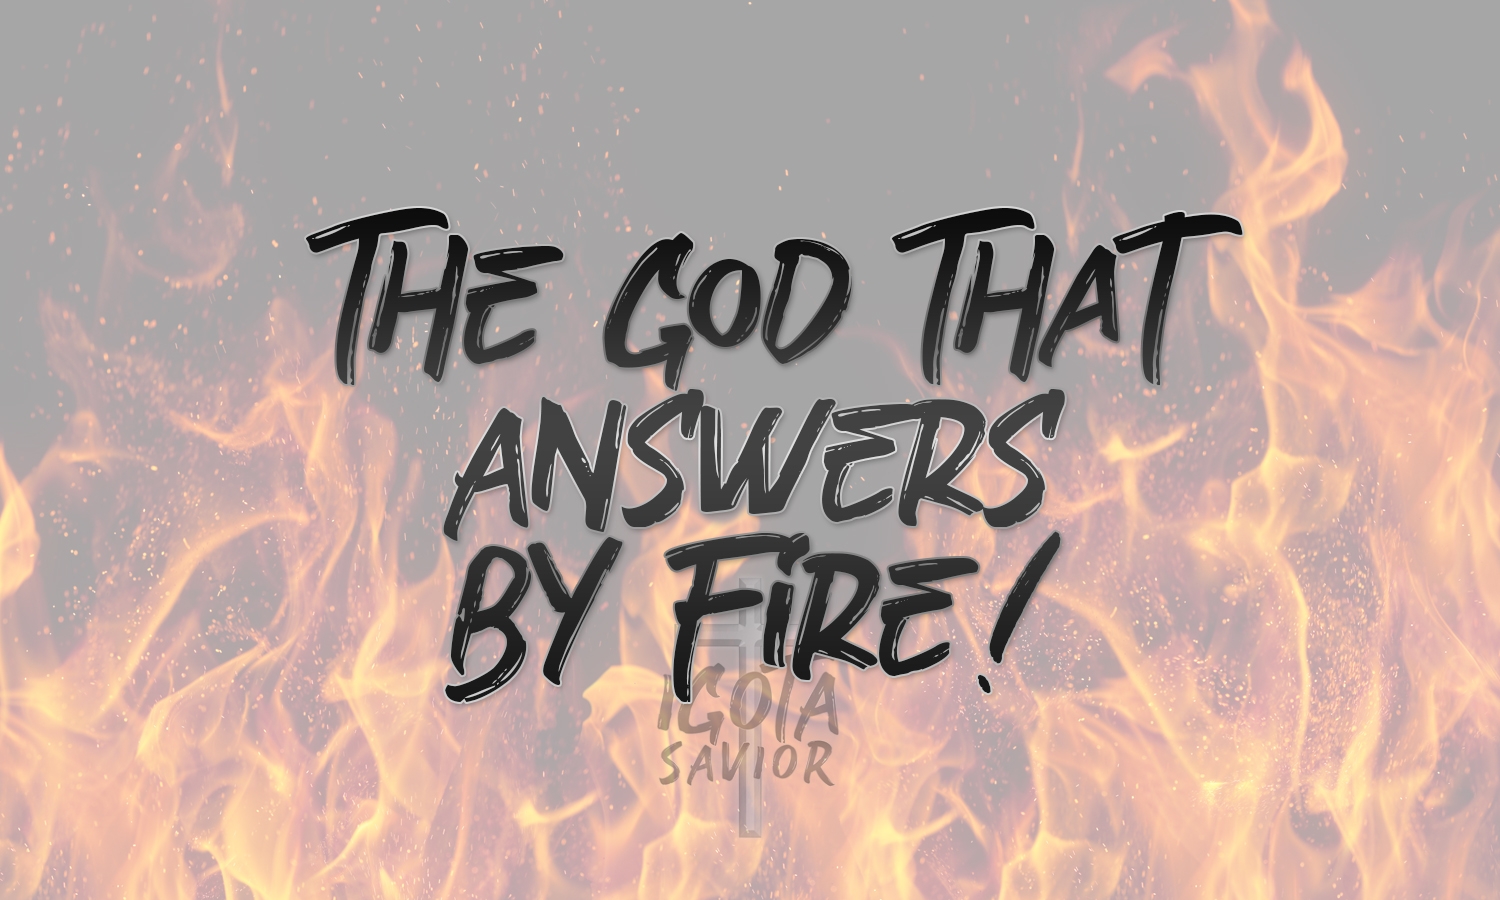 The God That Answers By Fire!